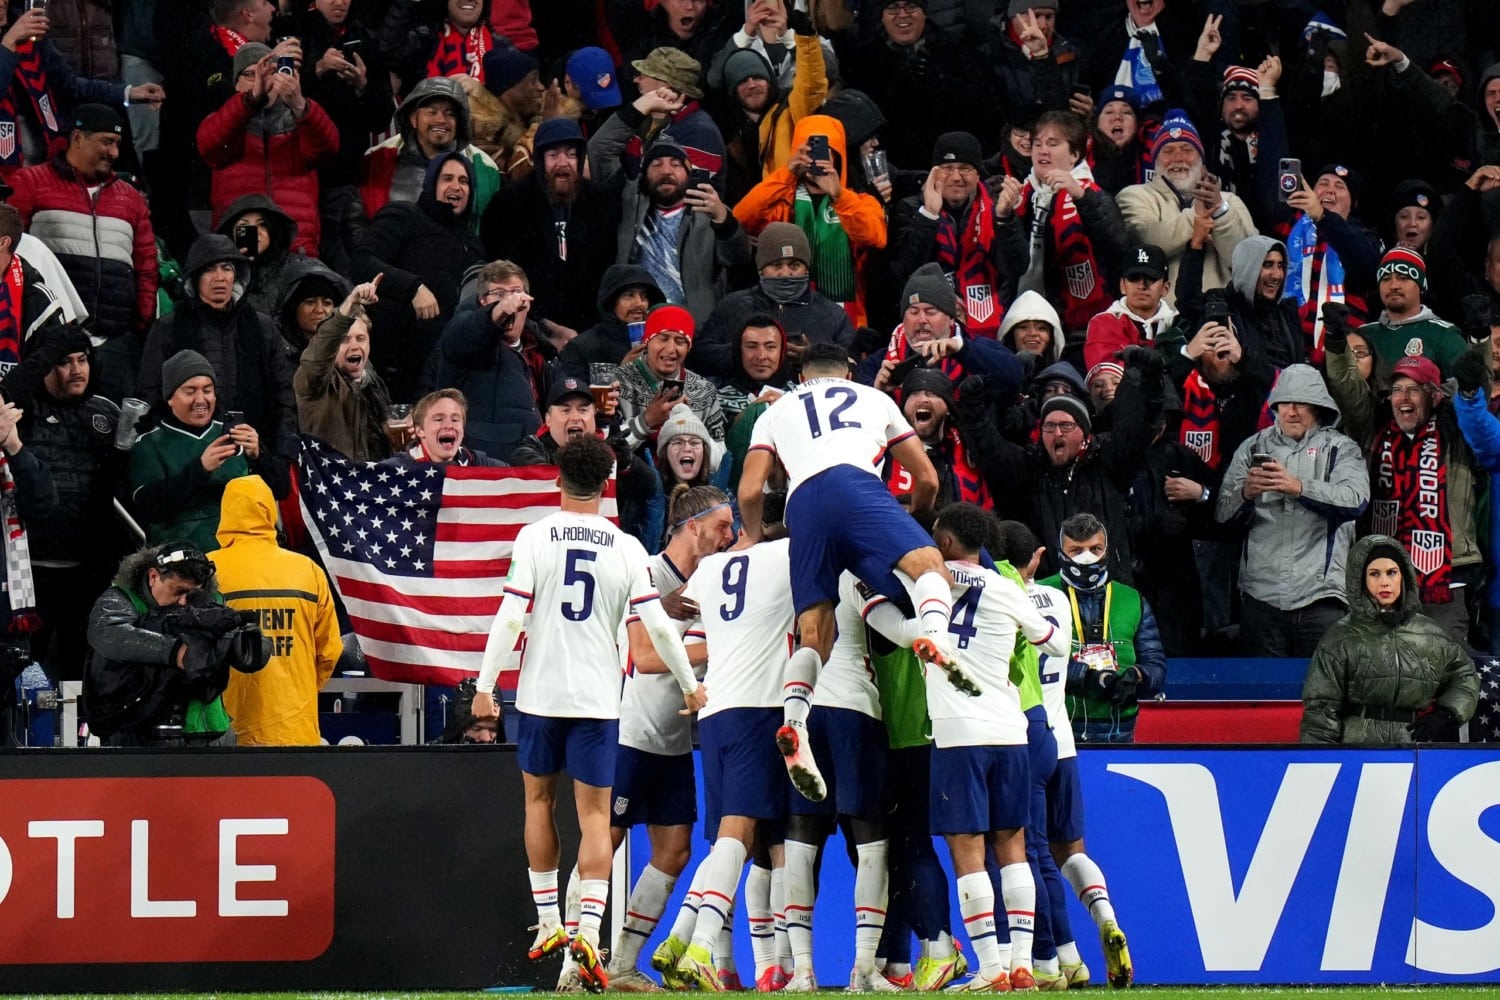 USMNT players celebrate in front of fans after scoring goal